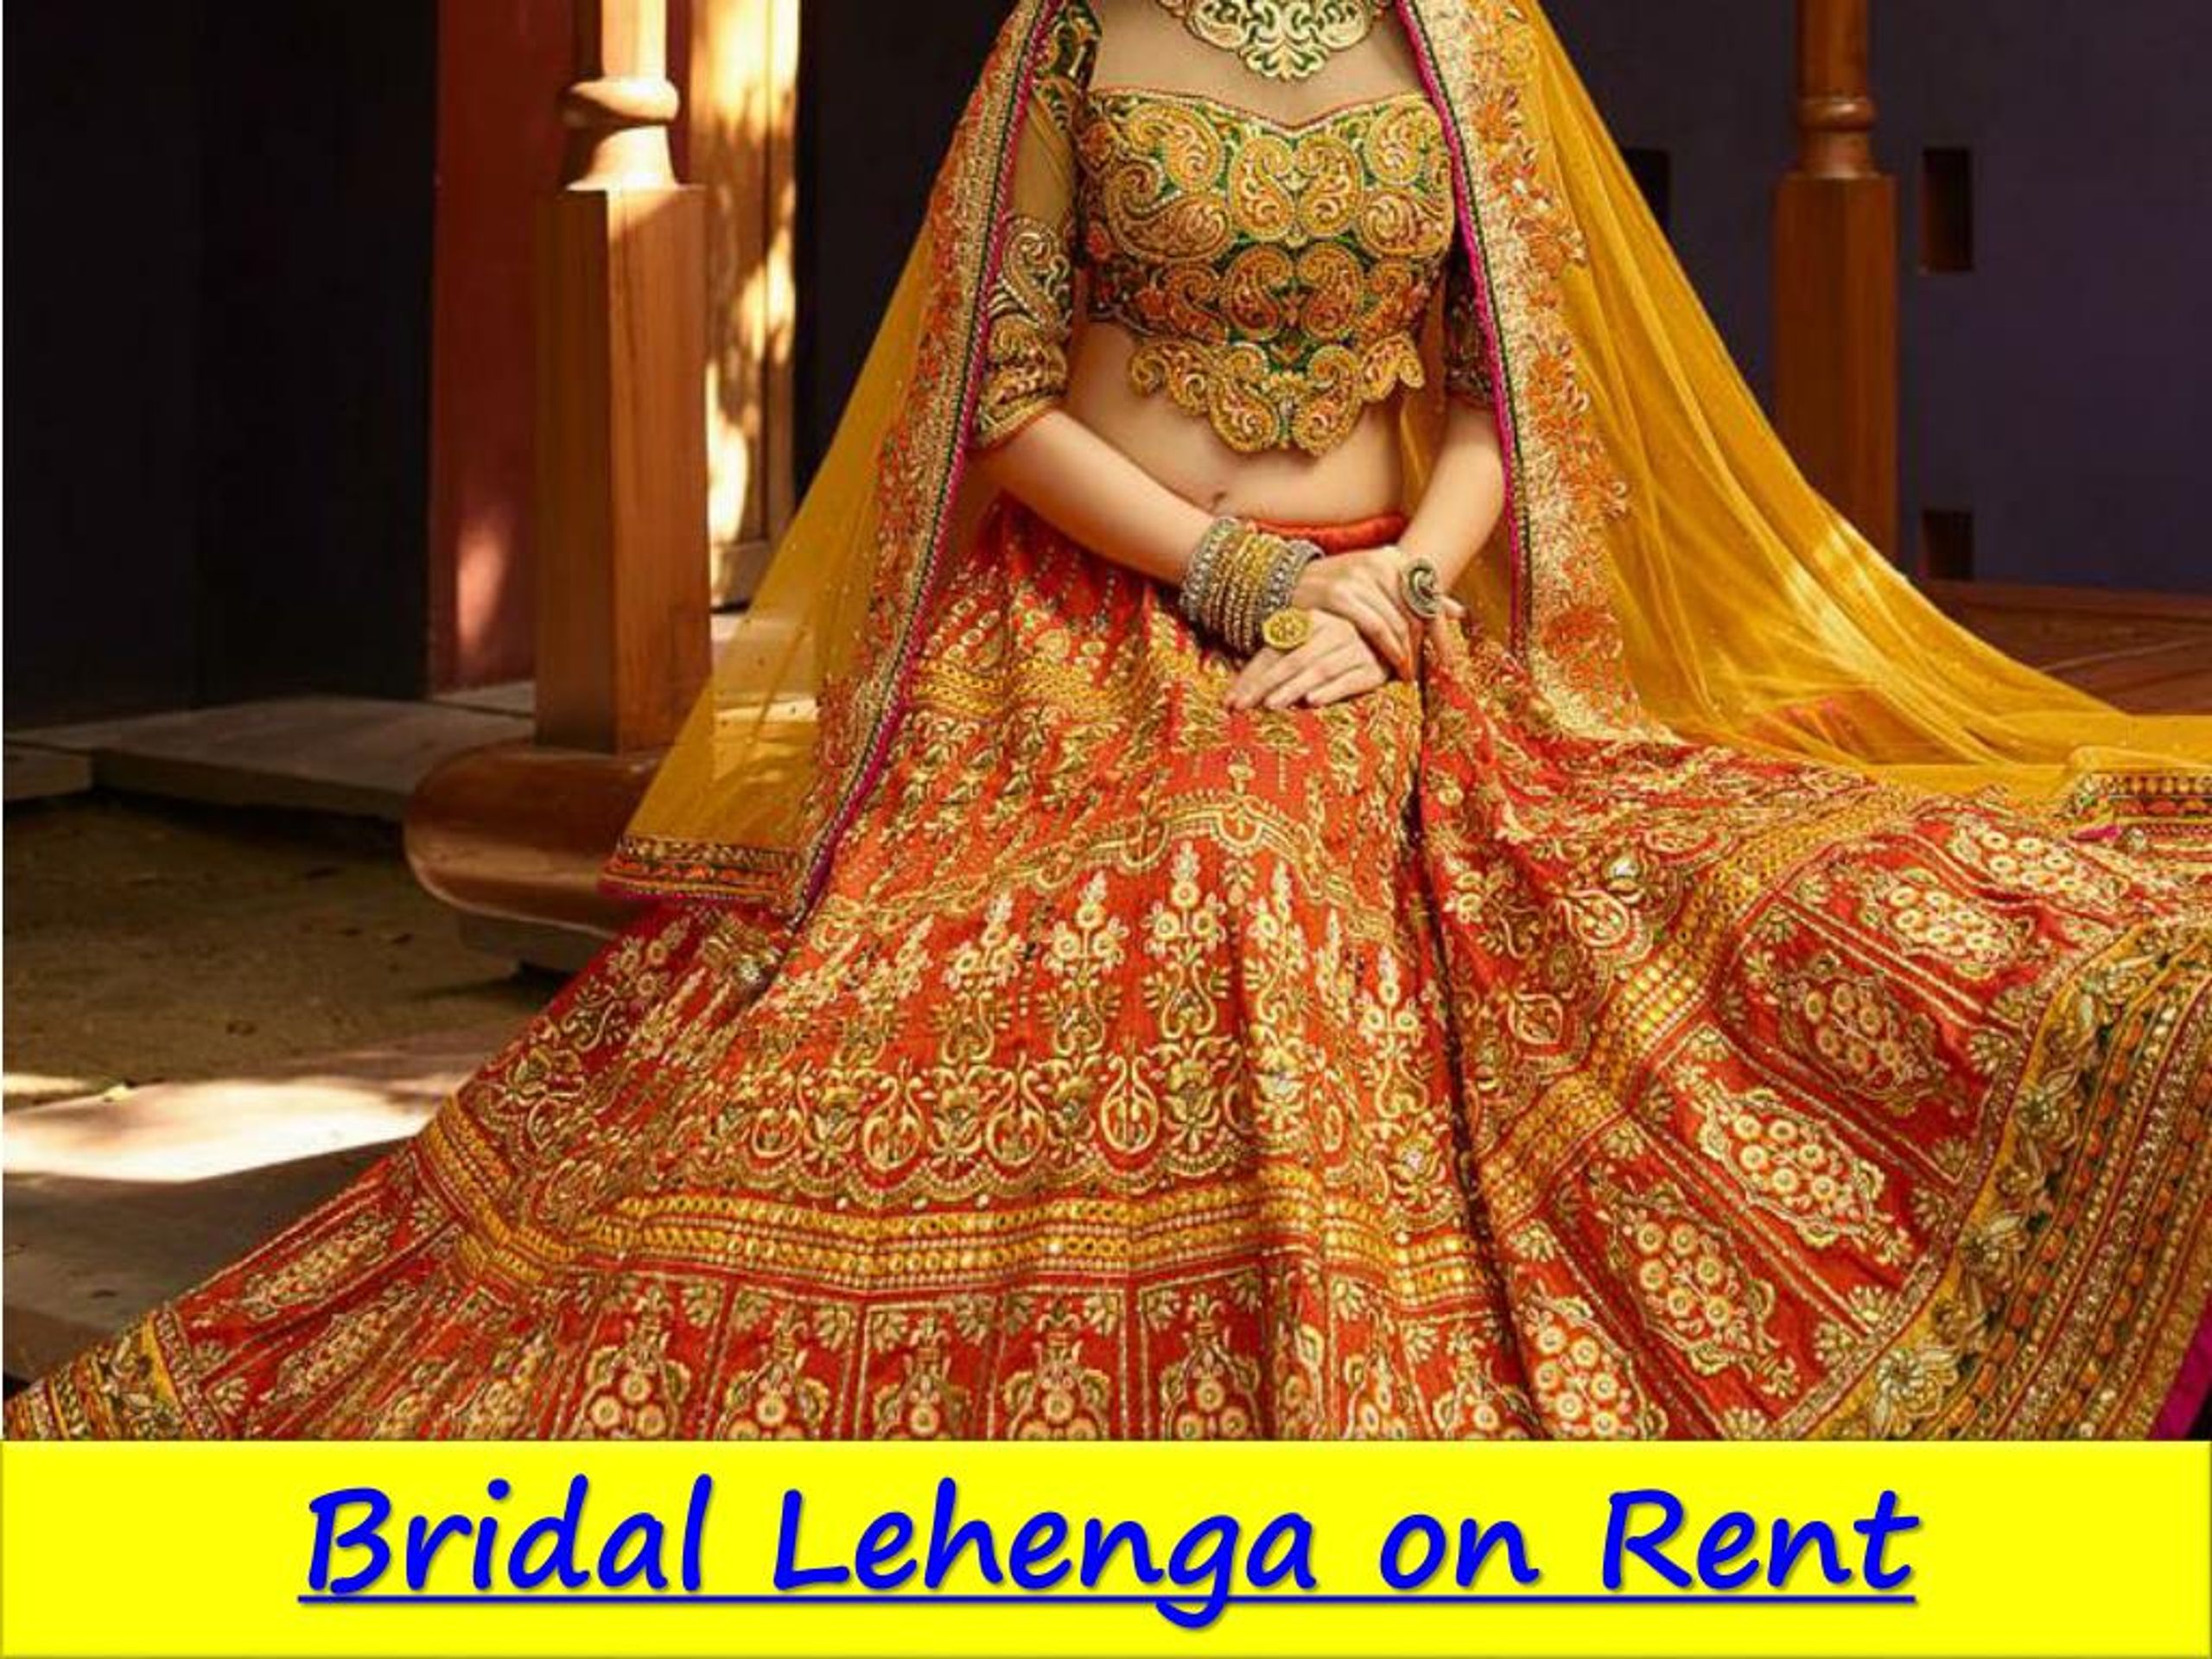 Wedding Dresses And Gowns On Rent in Gurgaon, Gurgaon Wedding Dresses And  Gowns On Rent | Weddingplz